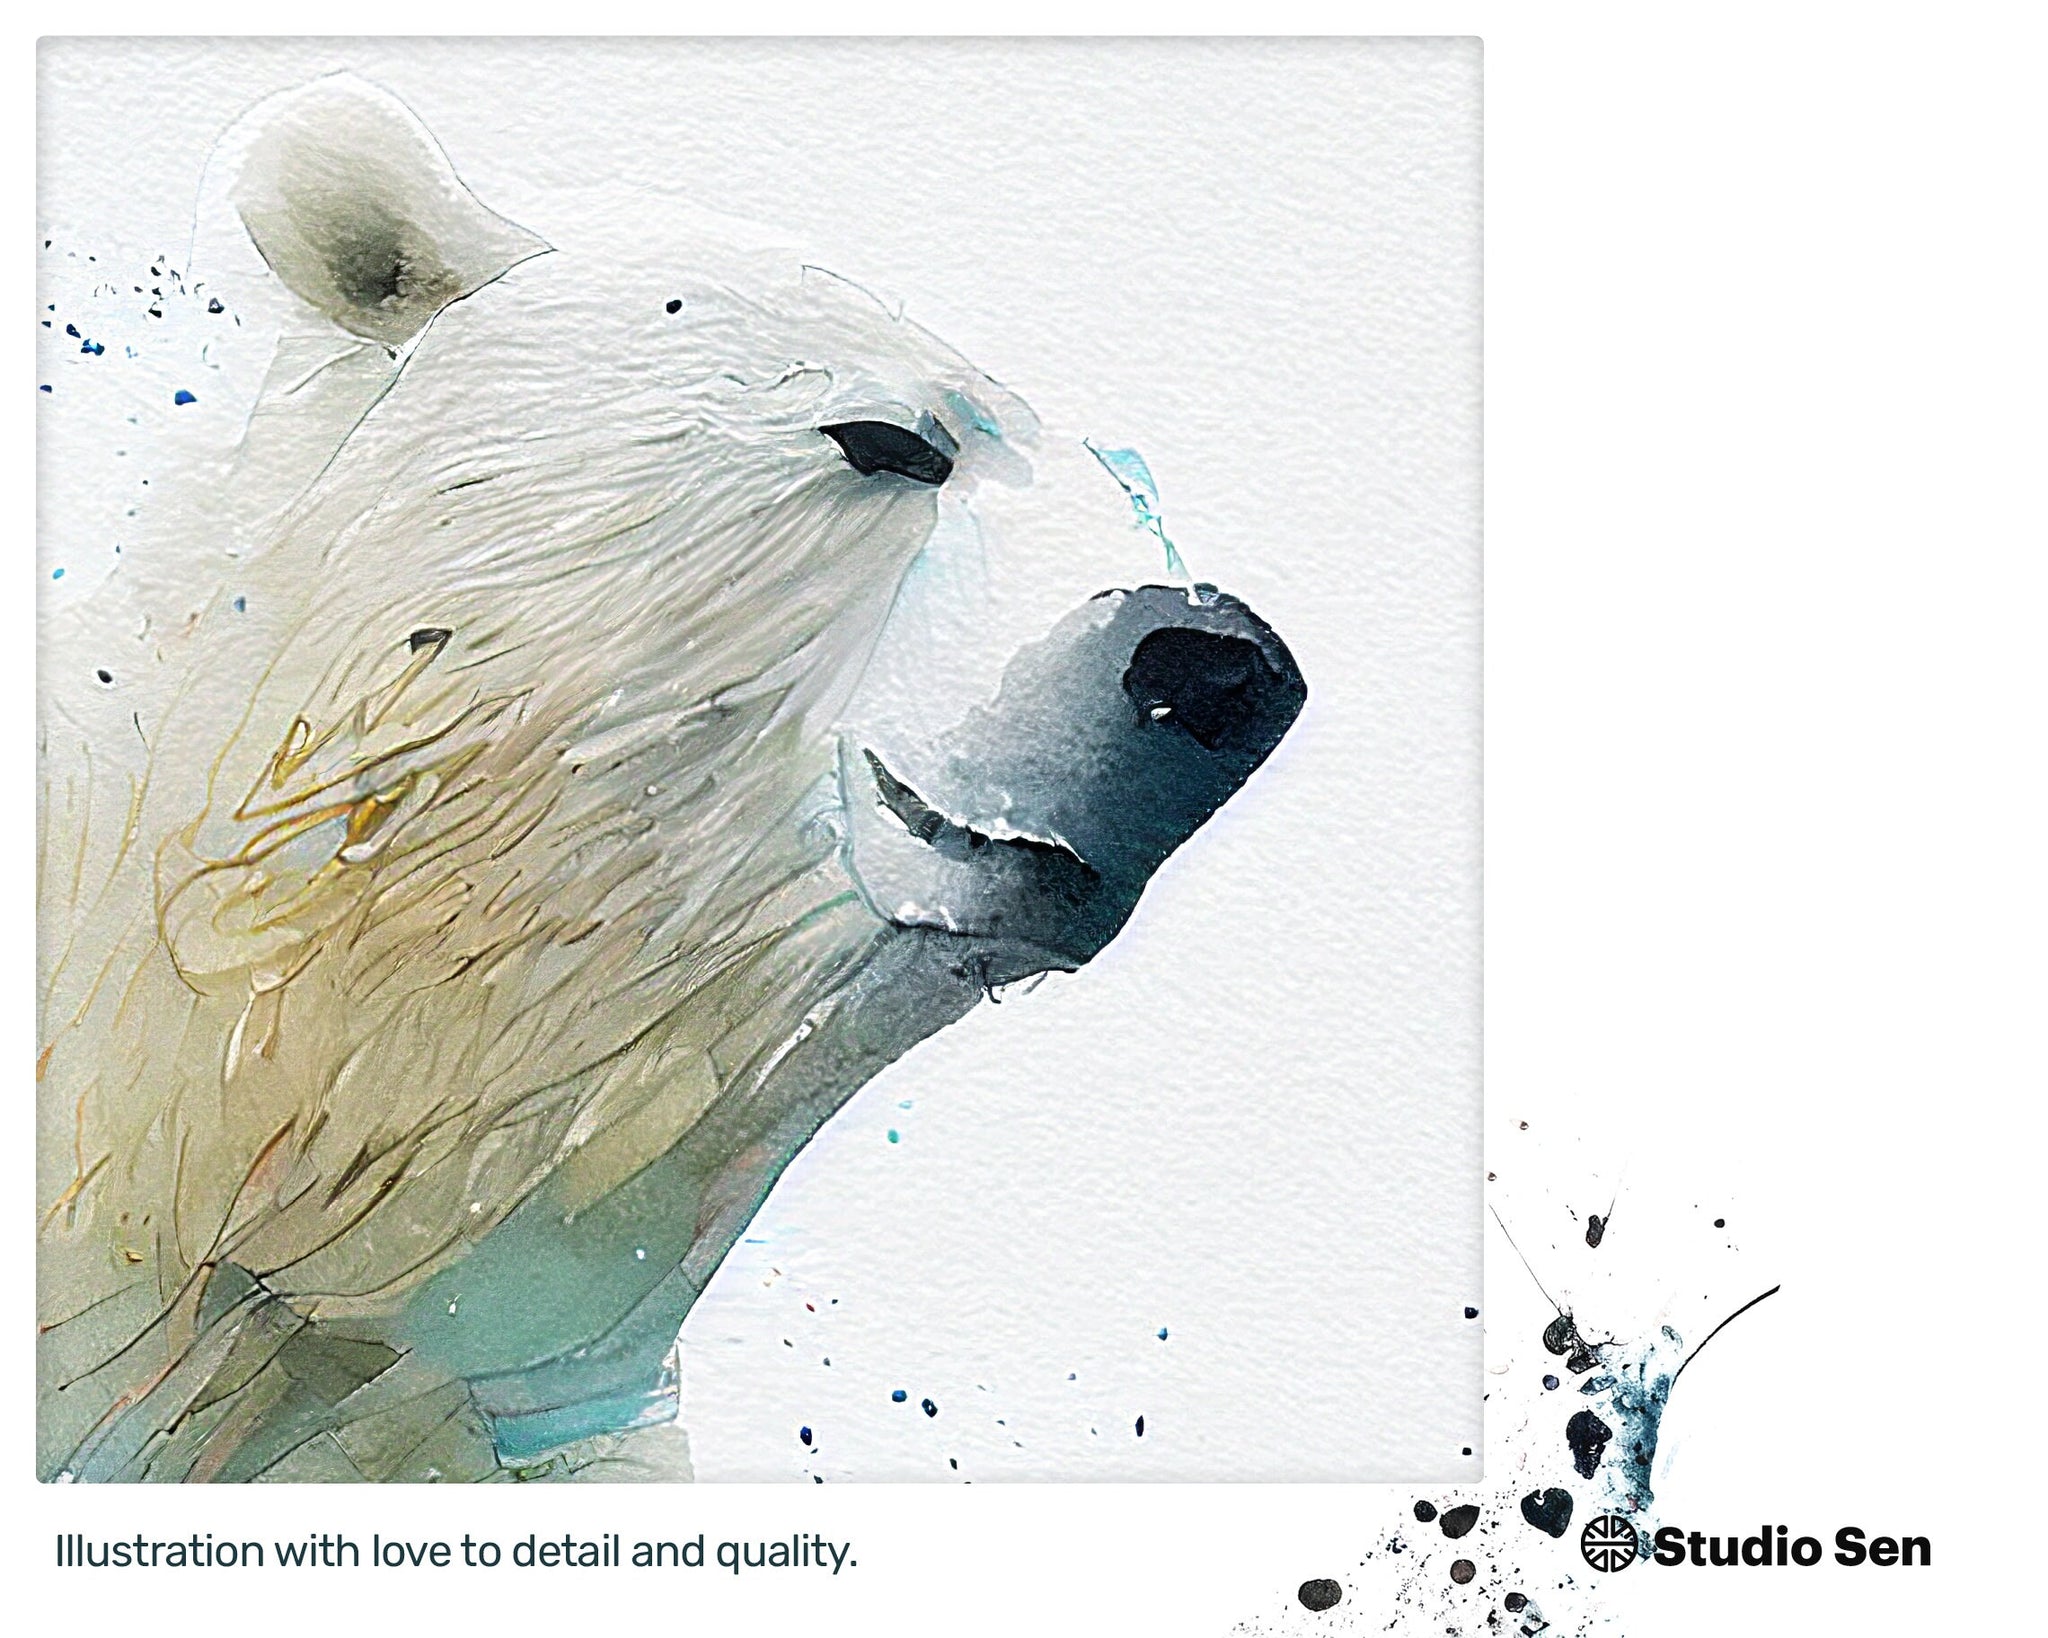 Snowy Stunning Polar Bear, Alluring Playful Poster, Beautiful Pleasant Jazzy Vibrant Downloadable Craft